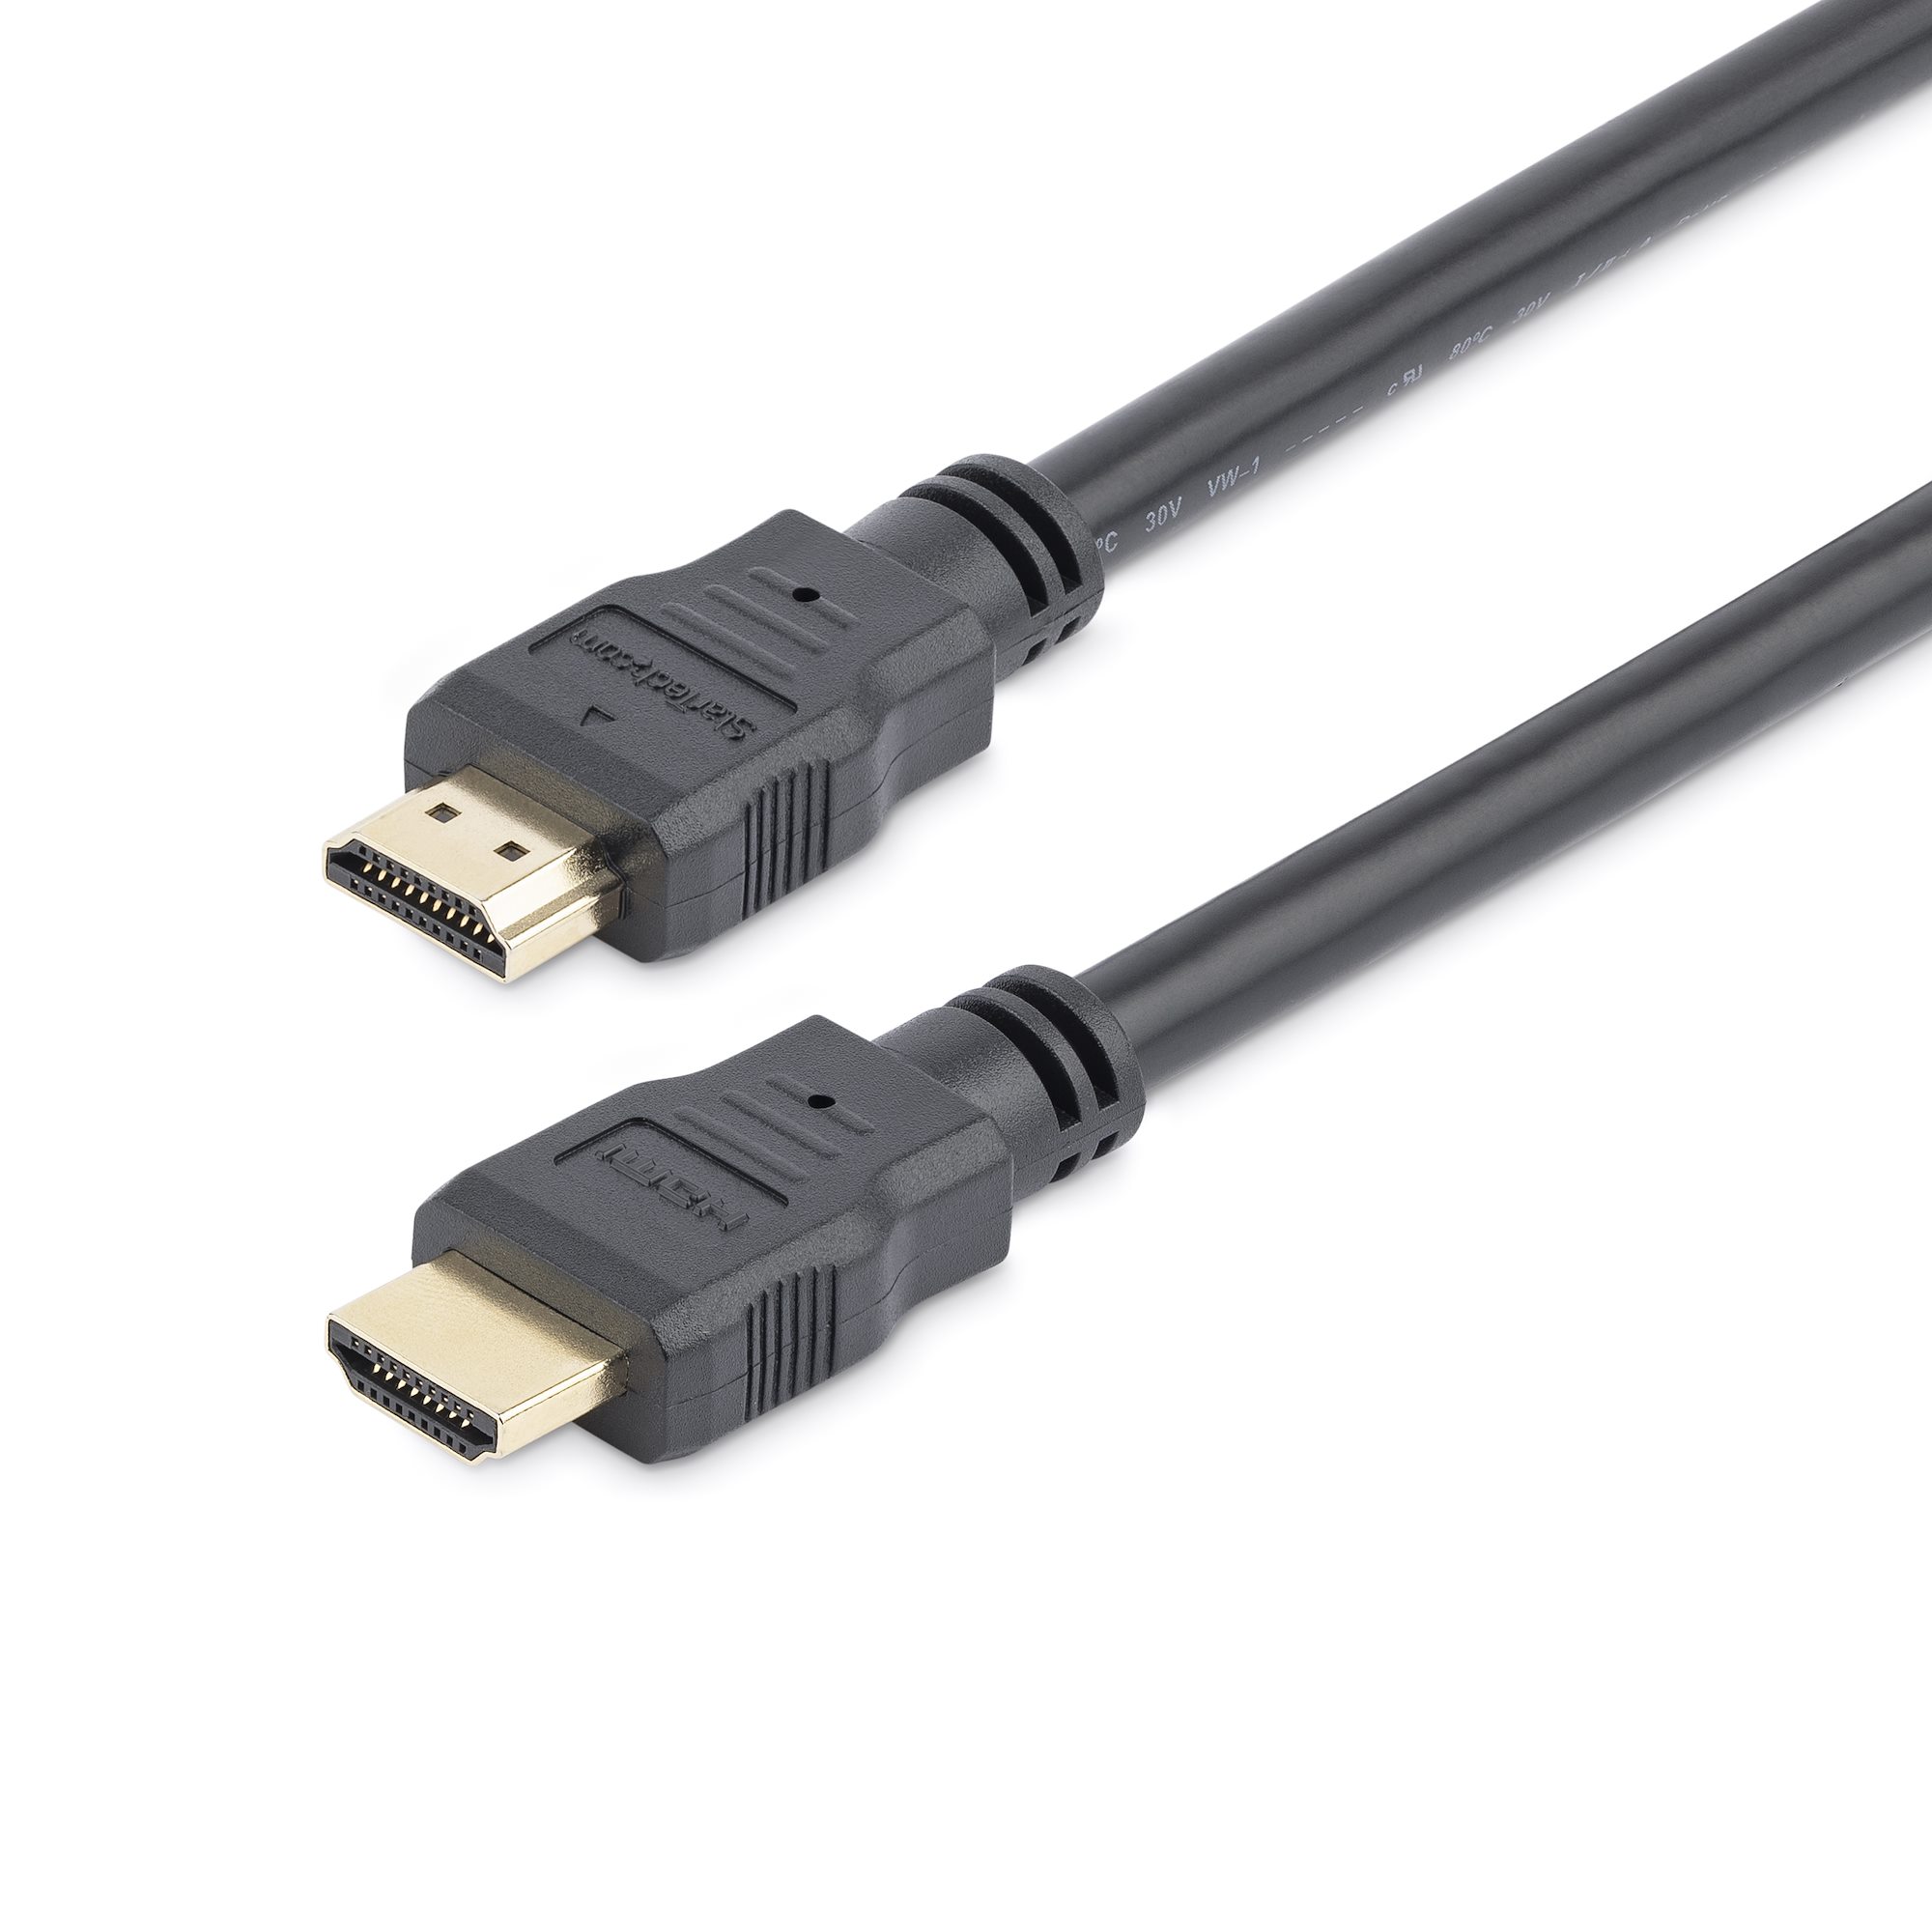 Kanin køkken Sølv 1ft 4K High Speed HDMI Cable - HDMI 1.4 - HDMI® Cables & HDMI Adapters |  StarTech.com